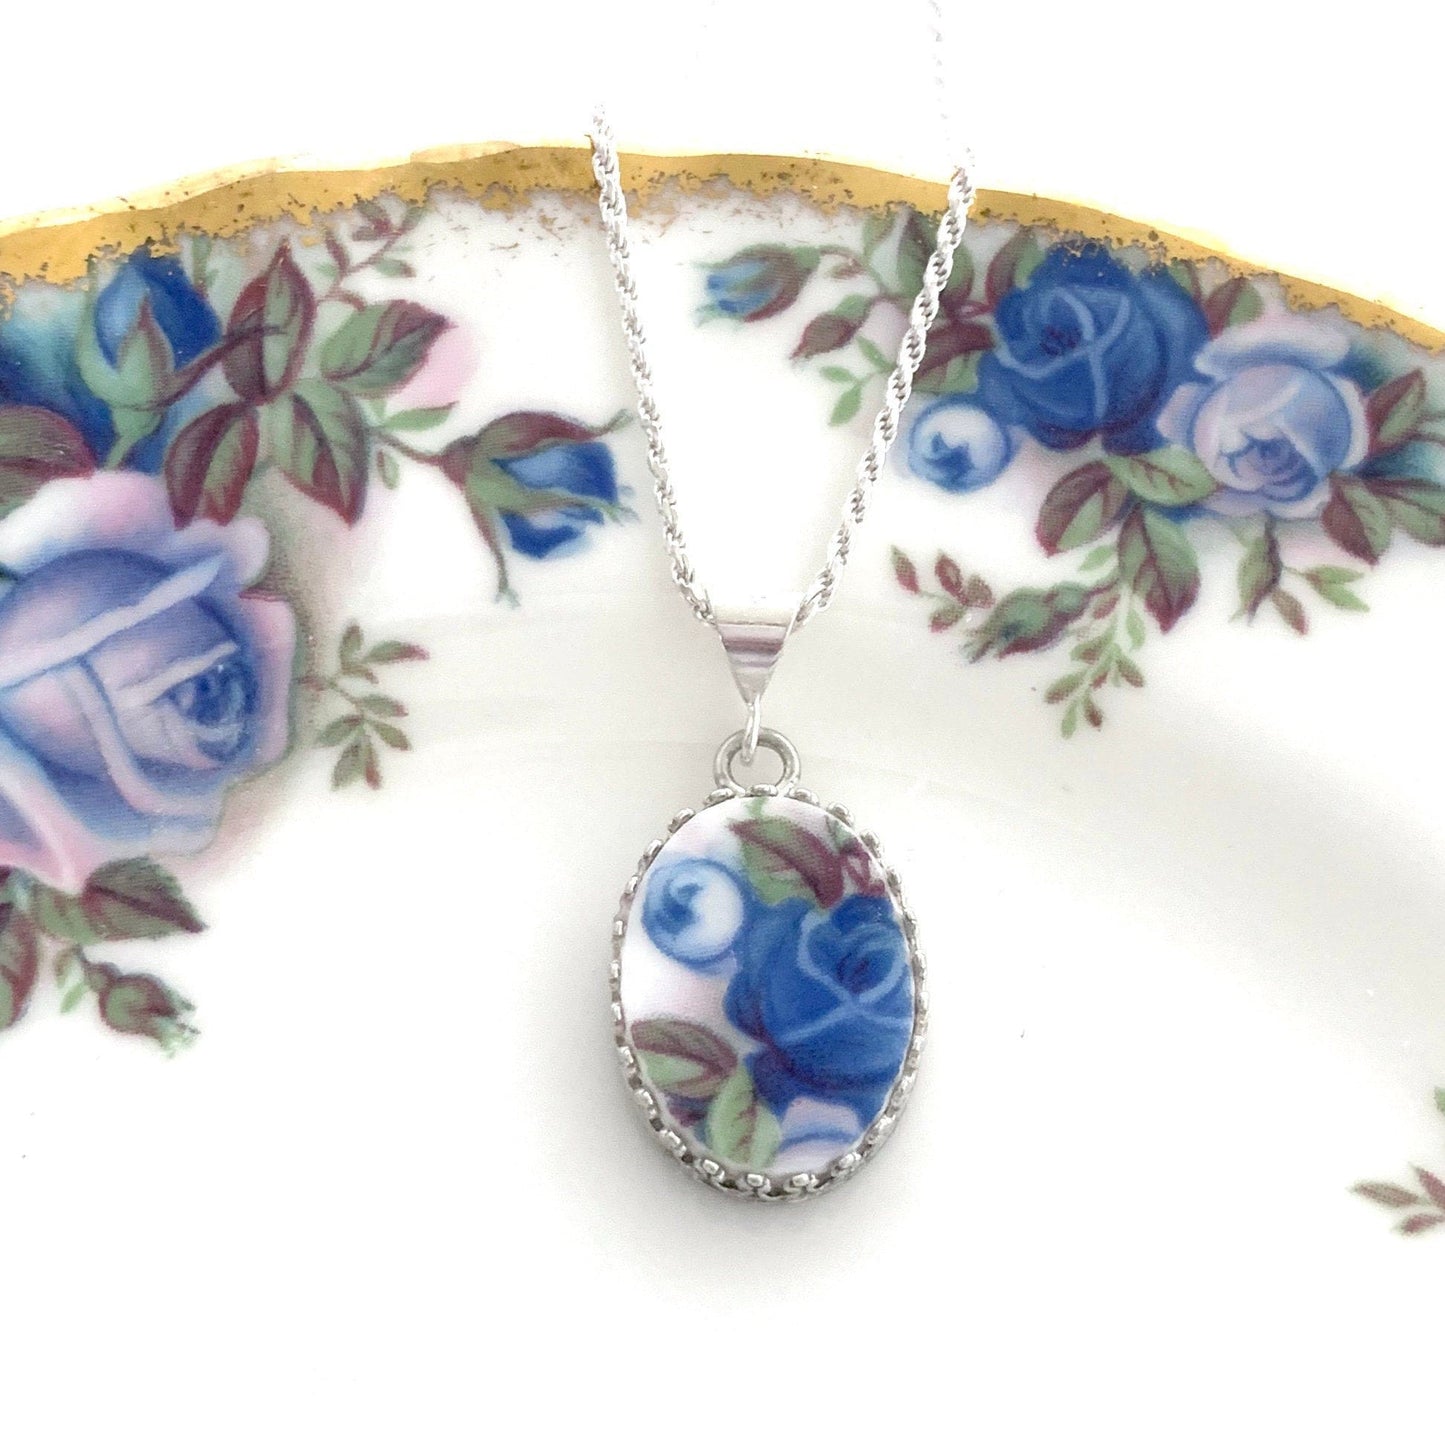 Moonlight Rose Dainty China Necklace, Unique Gifts for Women, Vintage Broken China Jewelry, Royal Albert Blue Rose China, Graduation Gifts